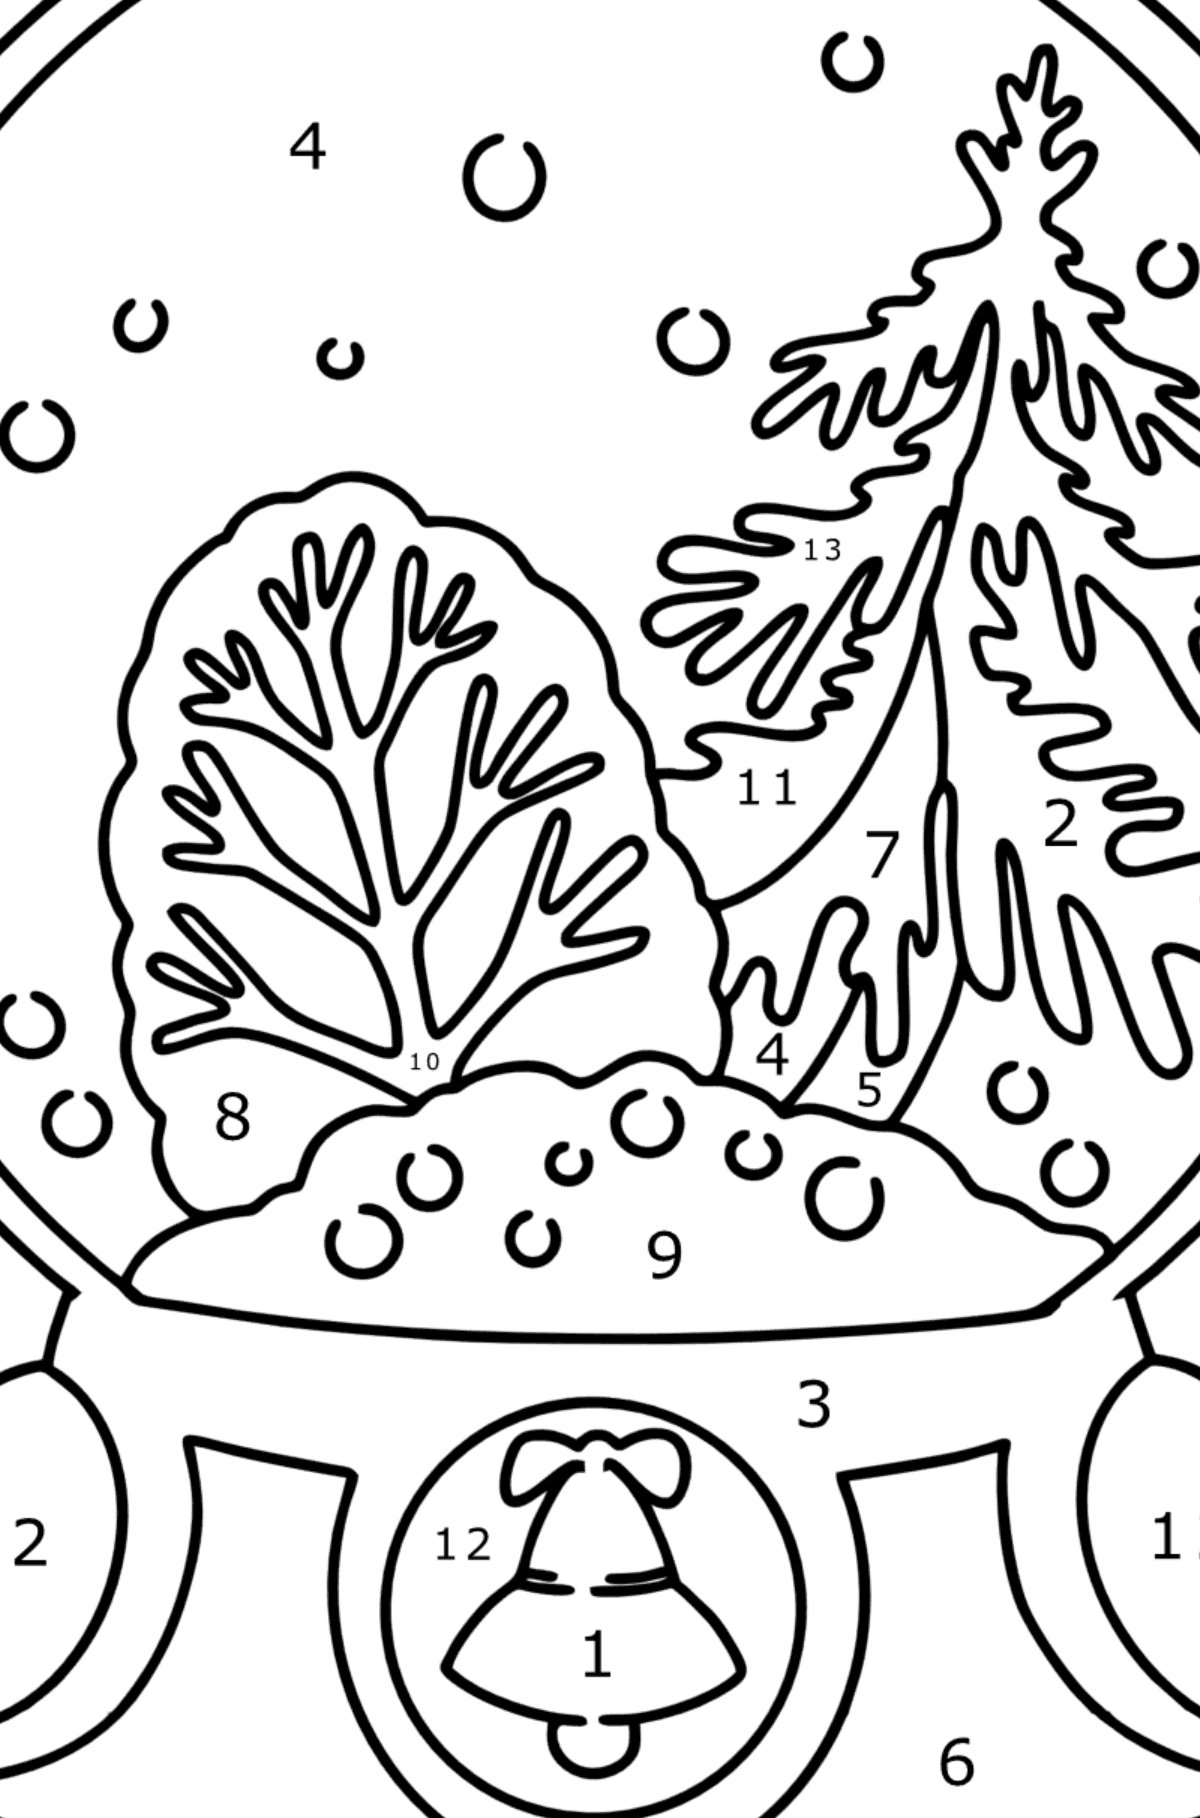 Snow Globe coloring page - Coloring by Numbers for Kids